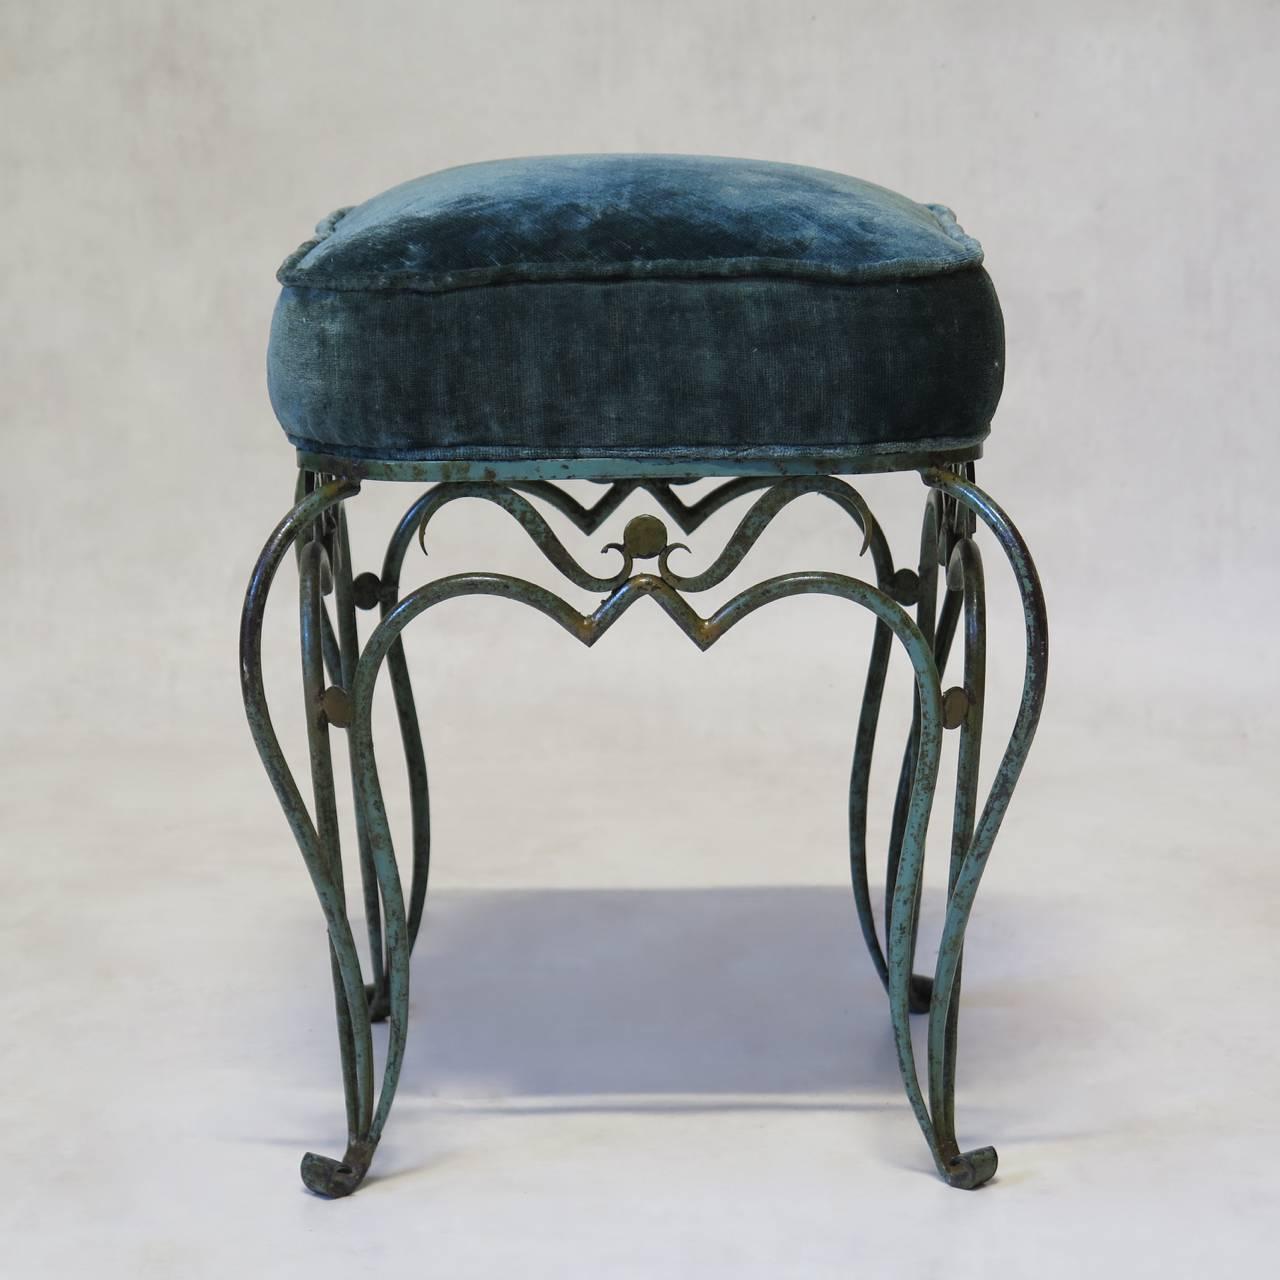 Delightful pair of petite wrought iron stools in the style of René Drouet and René Prou. The iron bases feature exaggerated cabriole legs ending in scrolled feet and are painted in the original verdigris color, with details highlighted in gold.